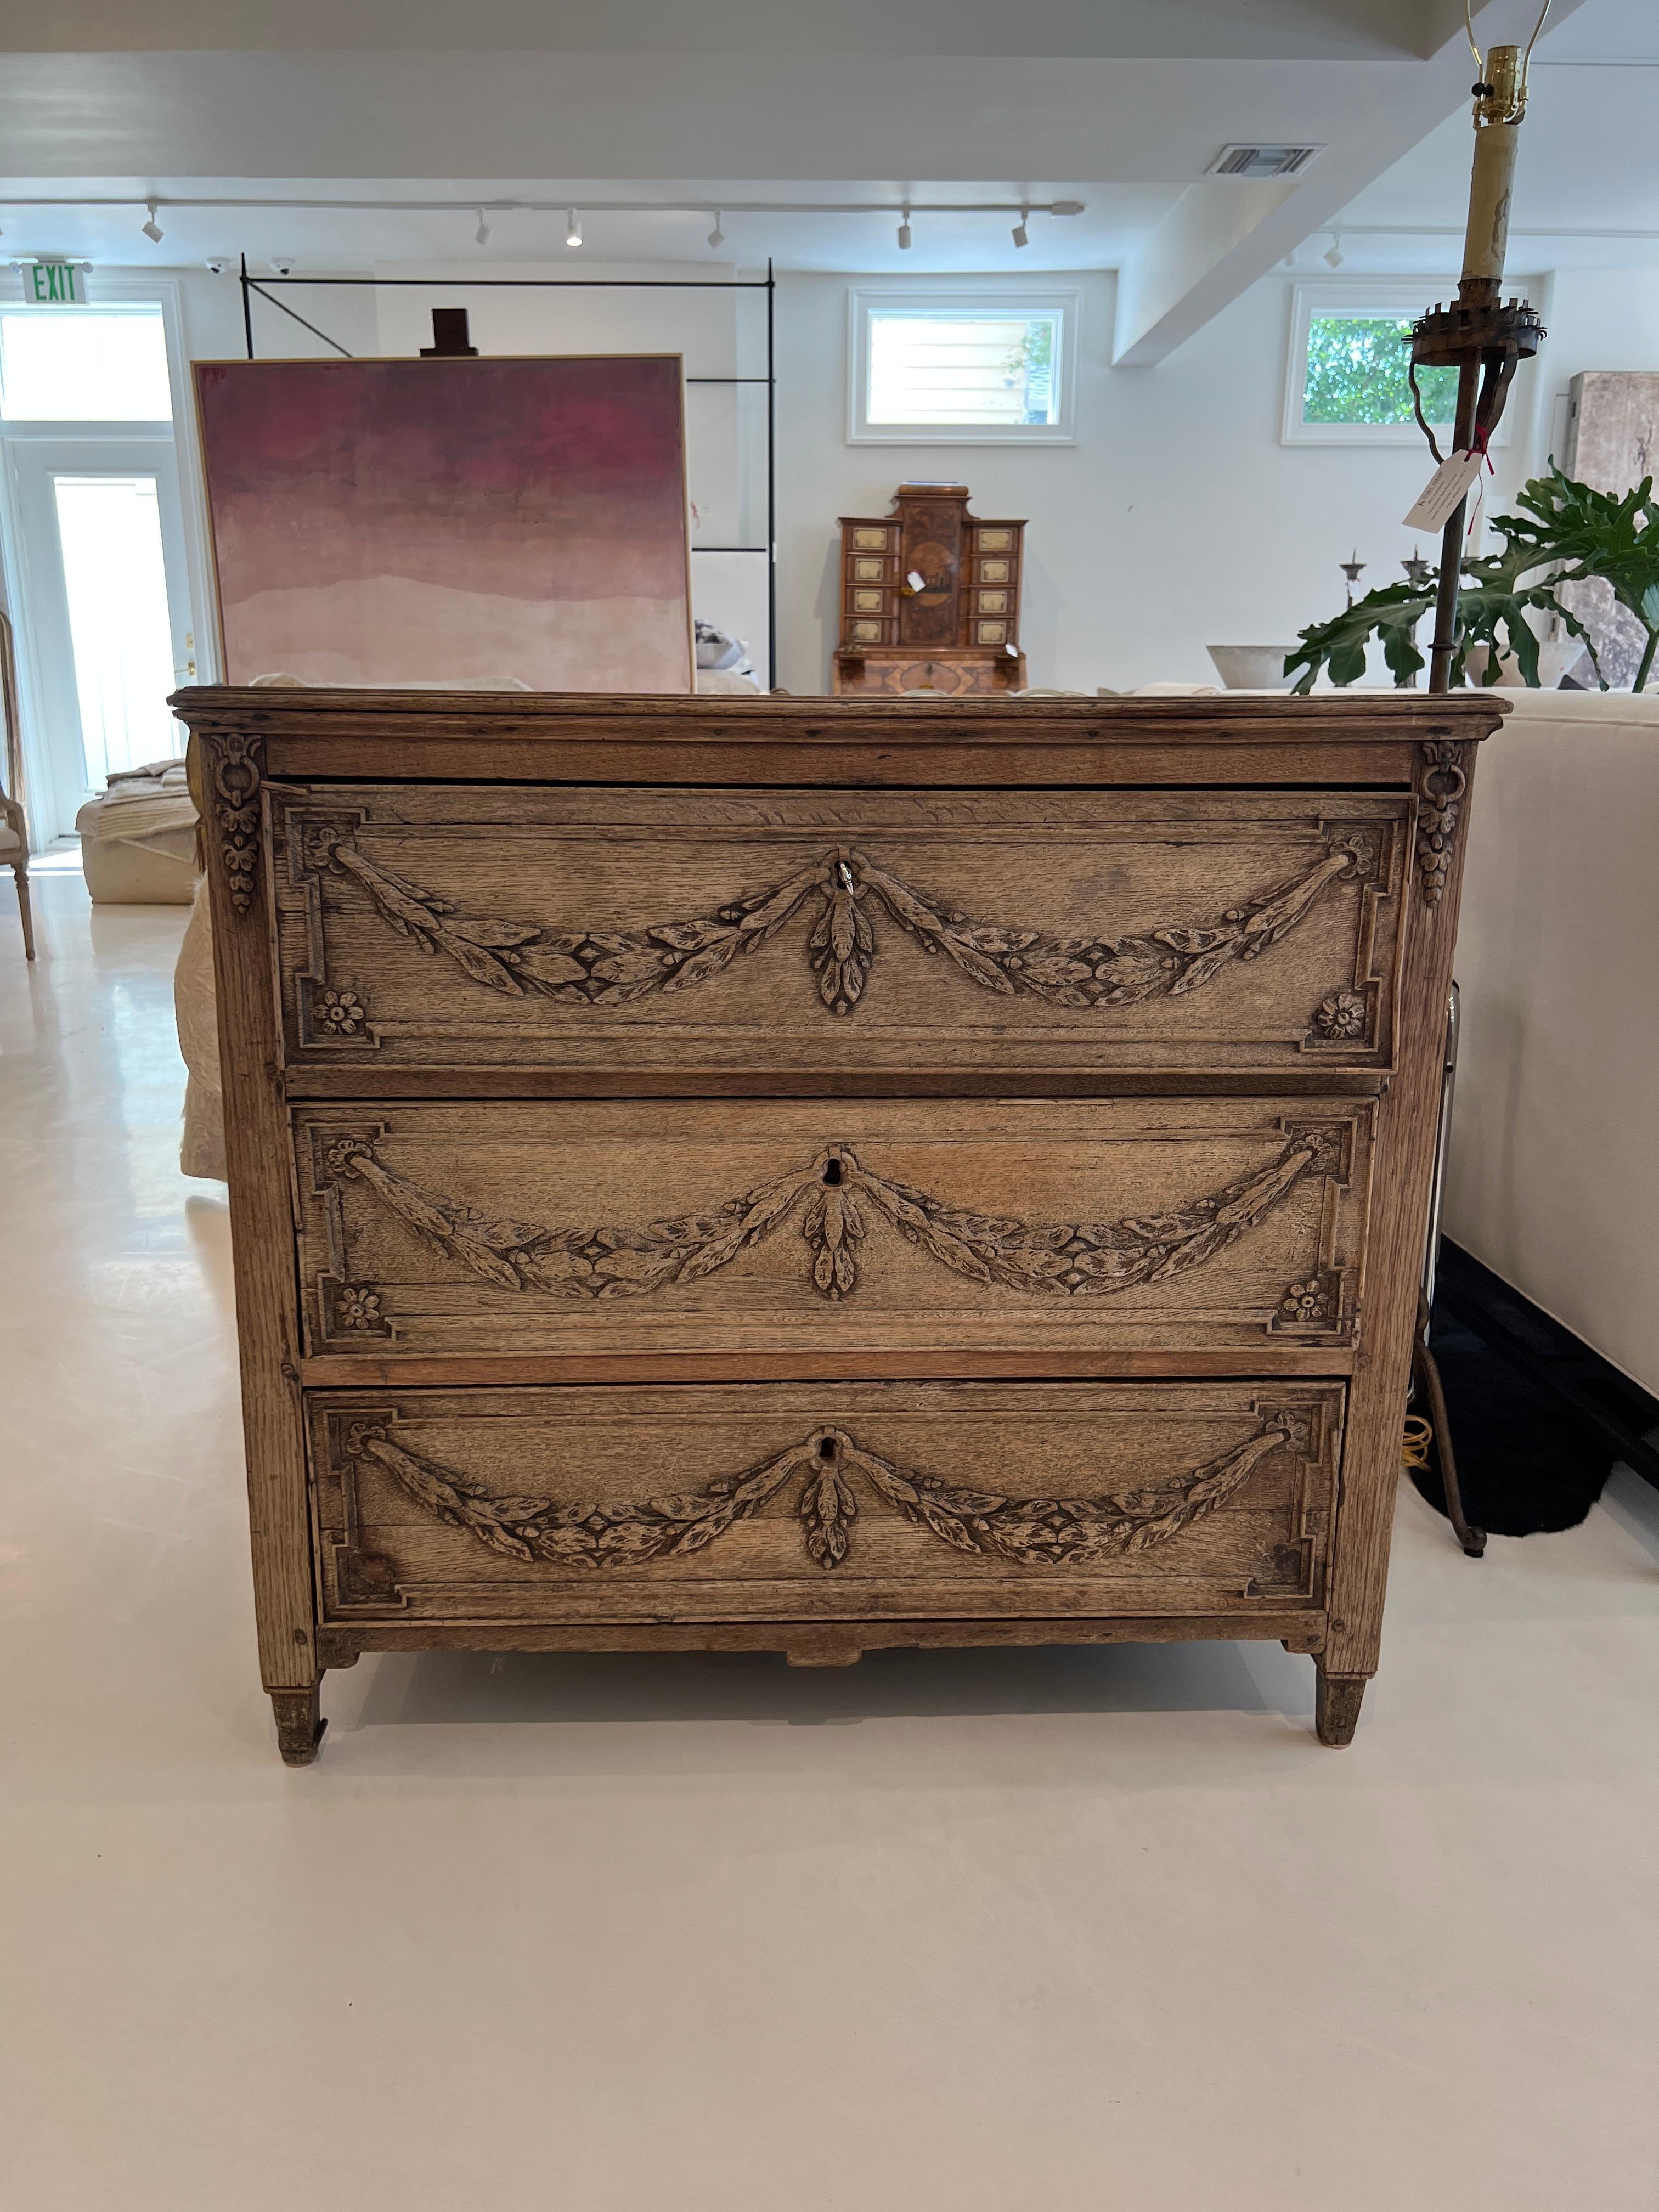 This chest is arrestingly beautiful due to the gentle carving of garlands and flowers on the drawer fronts. Perfectly symmetrical design on beautiful raw oak. Another fine feature is the depth of the top.